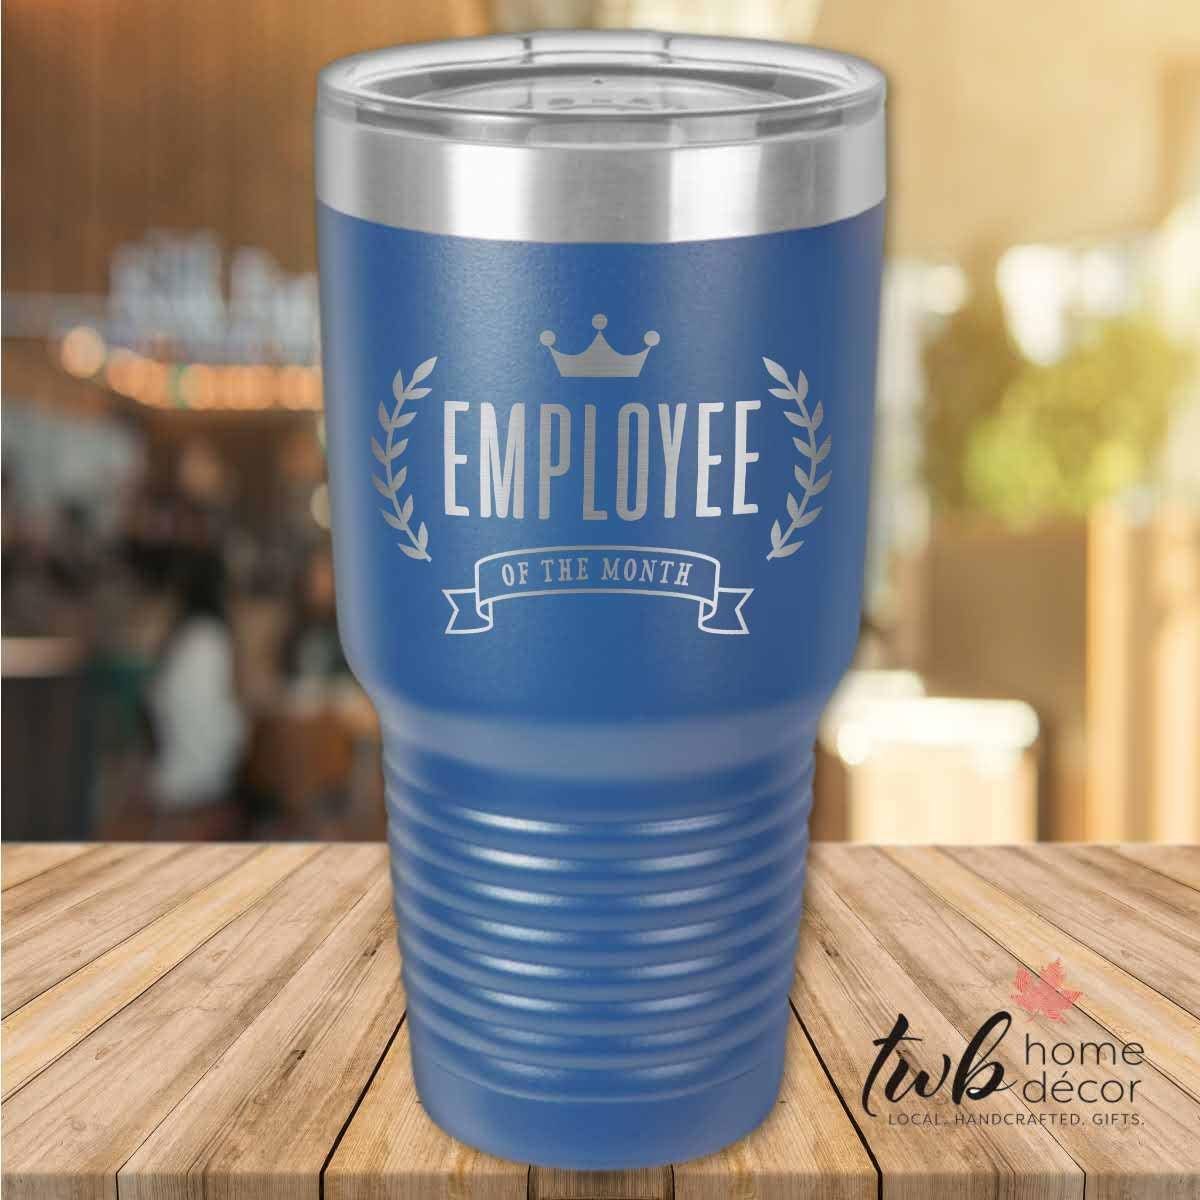 Employee of the Month Thermal - TWB Home Decor